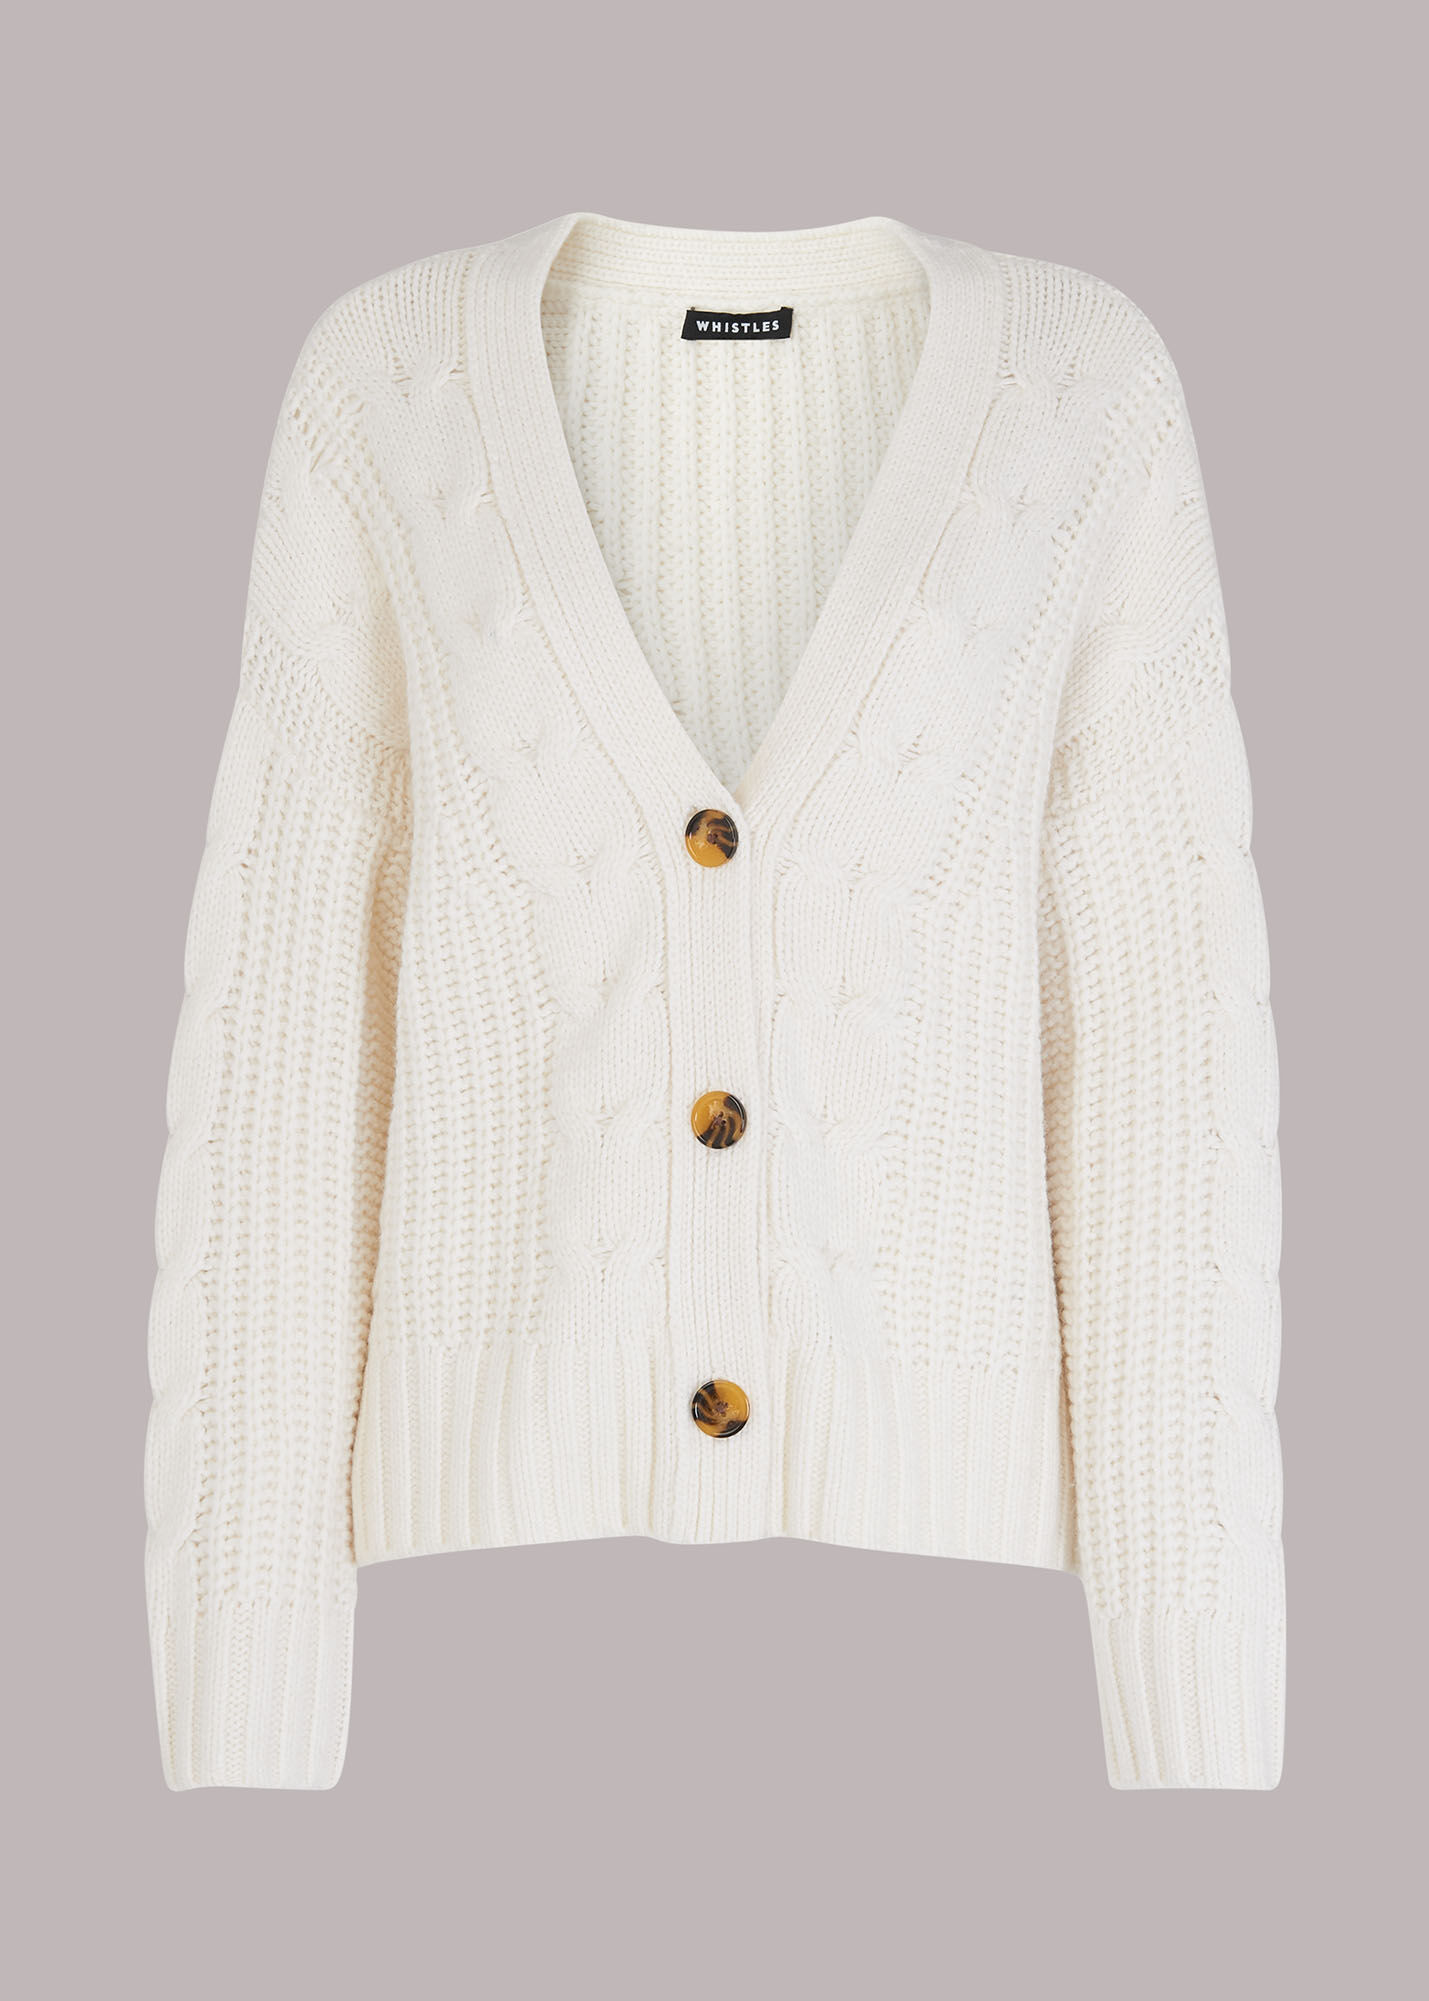 Ivory Cable Knit Cardigan | WHISTLES |